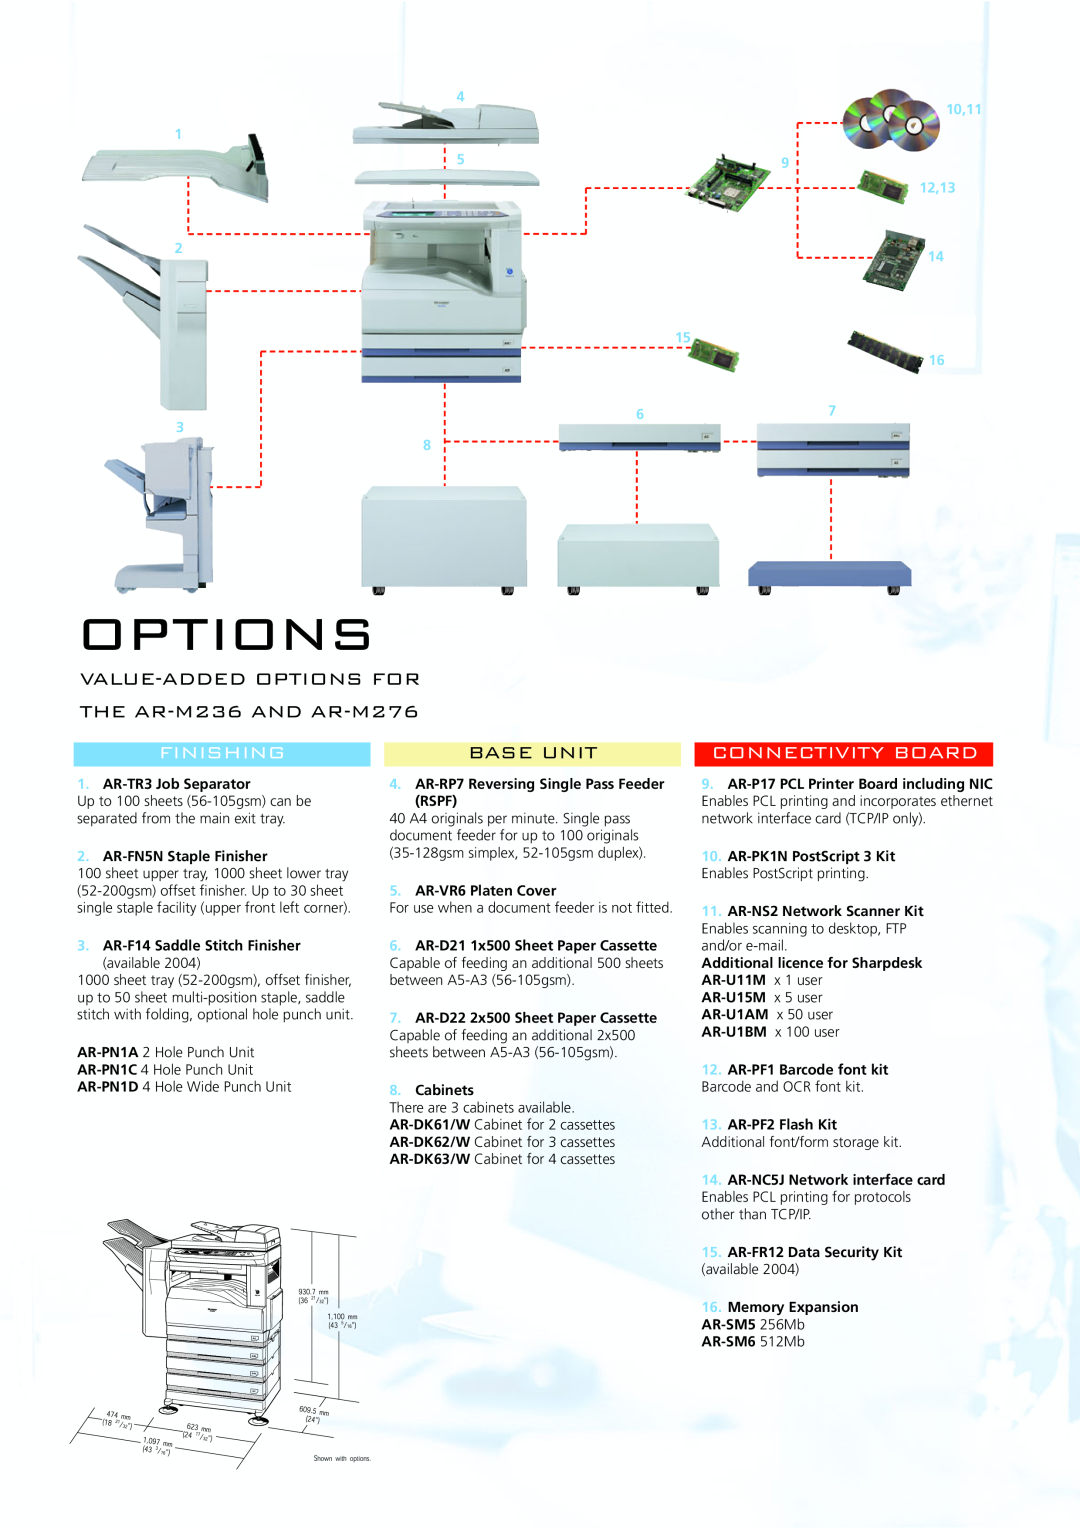 Sharp VALUE-ADDED OPTIONS FOR THE AR-M236 AND AR-M276, Base Unit, 10,11 12,13, AR-TR3 Job Separator, Cabinets, options 